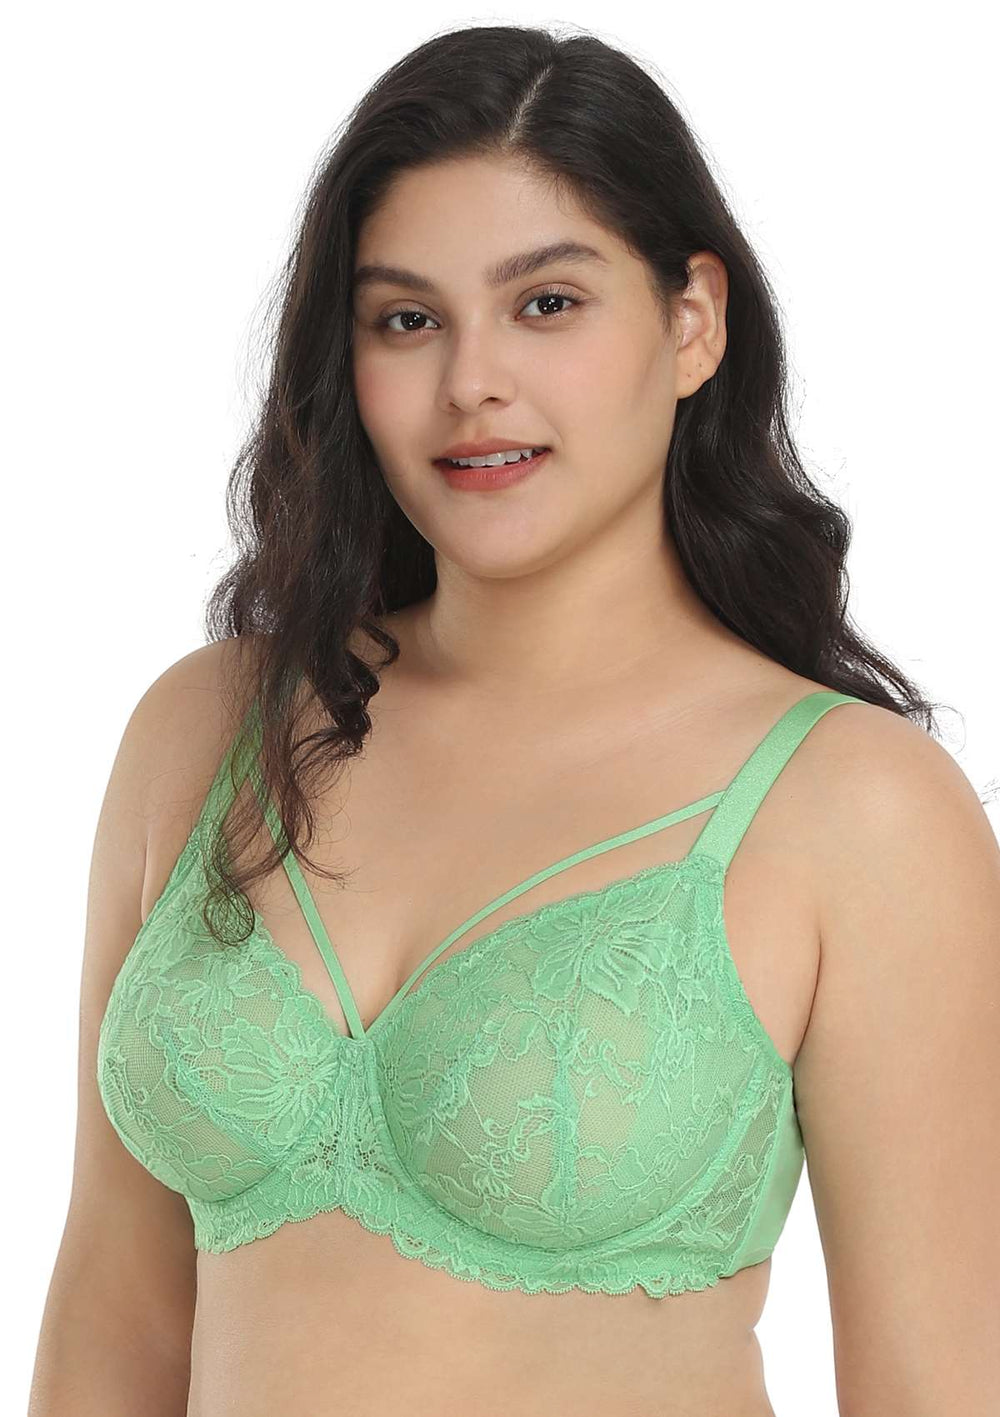 NEW HSIA Minimizer Bra Plus Size Lace Bra Full Coverage Underwire 44H - $27  New With Tags - From Mackooniebug